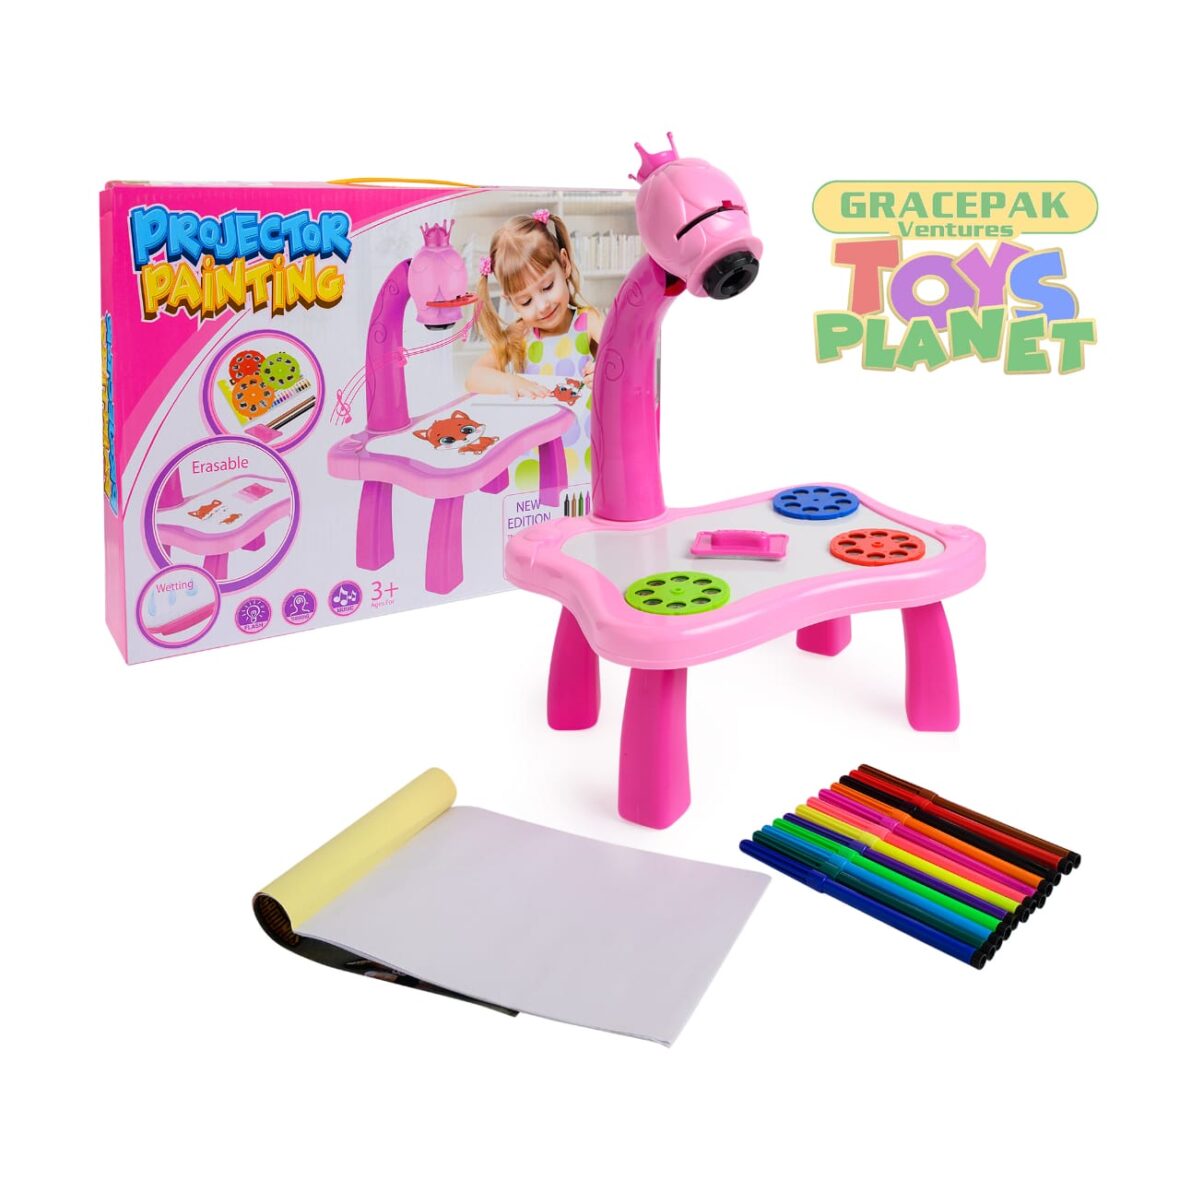 Kids Projector Painting Set